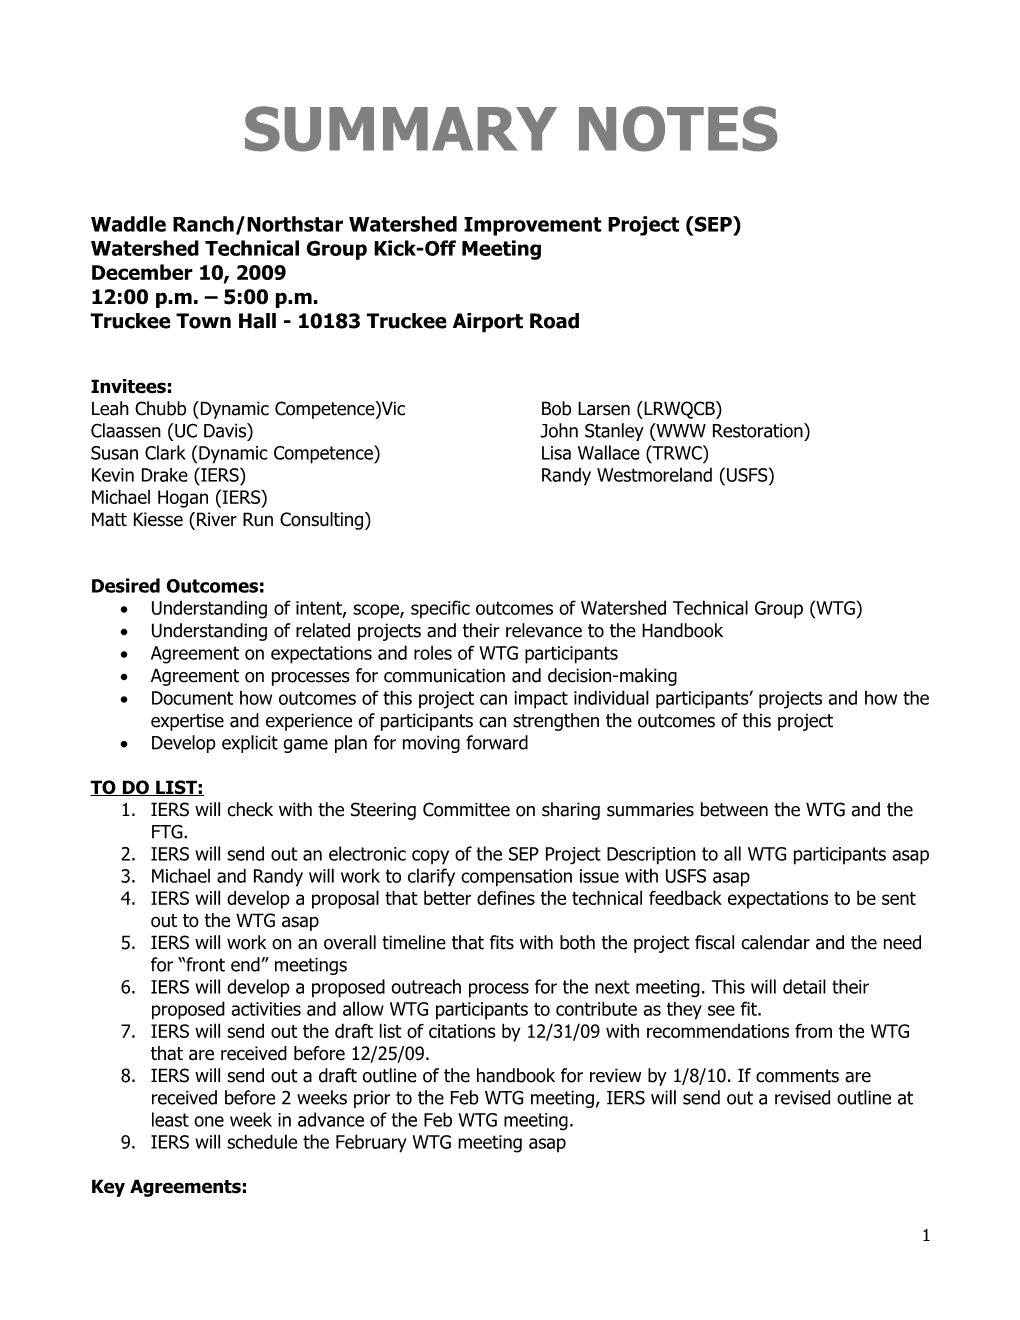 Waddle Ranch/Northstar Watershed Improvement Project (SEP)